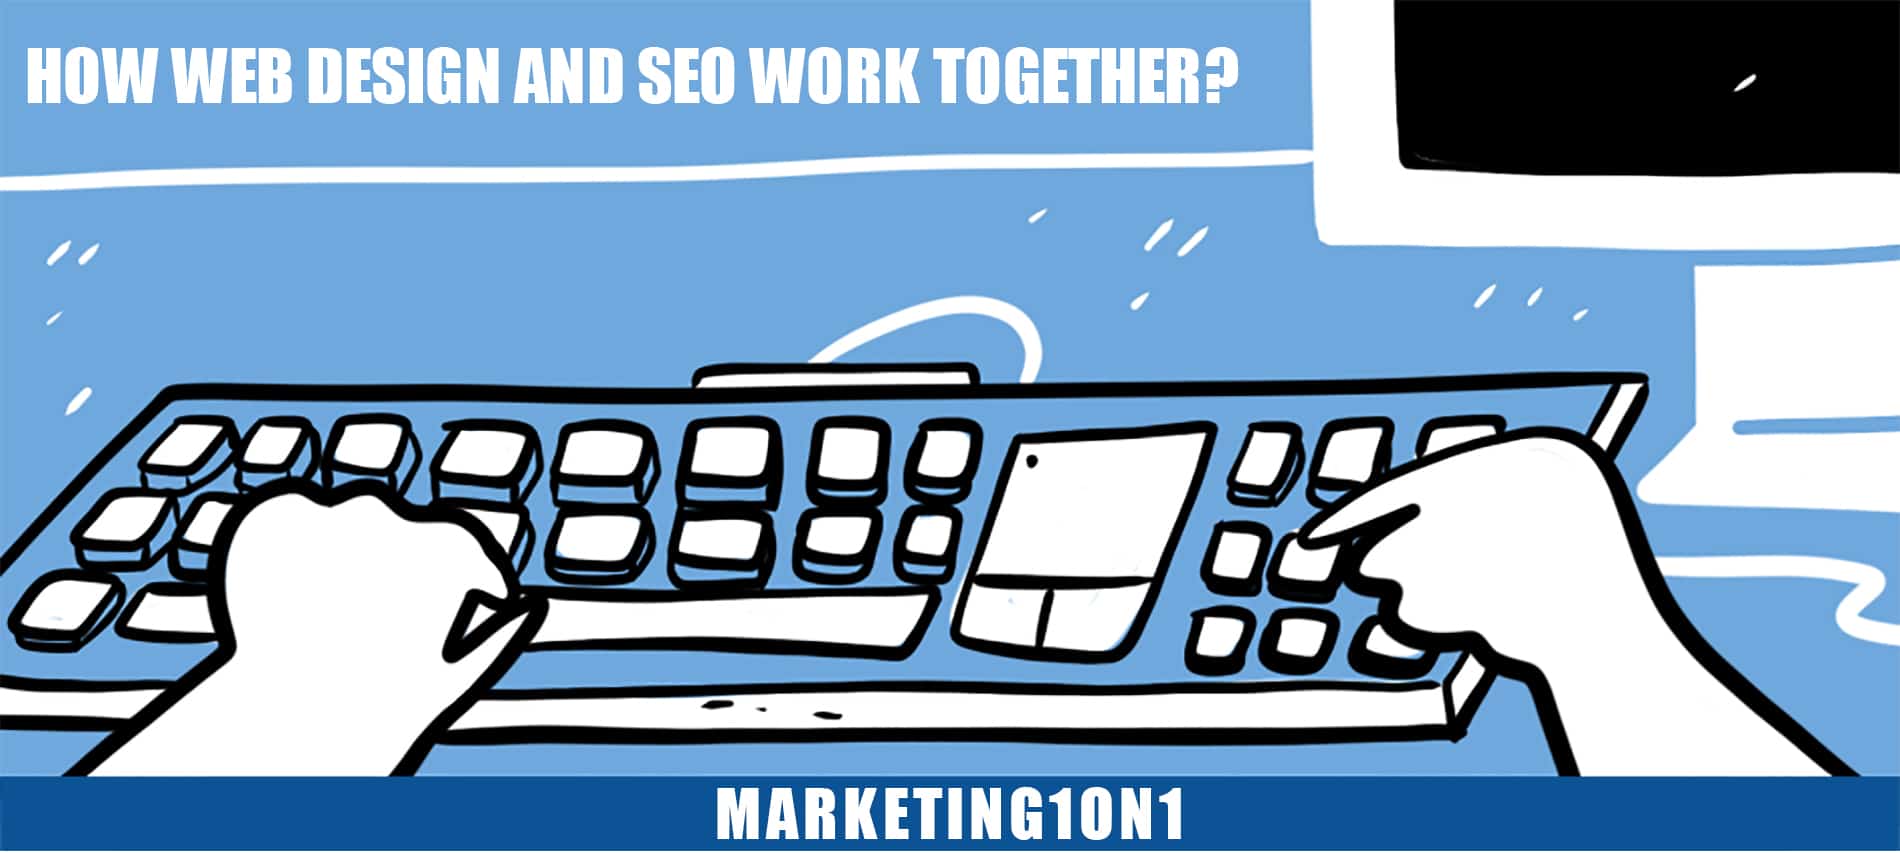 How web design and SEO work together?